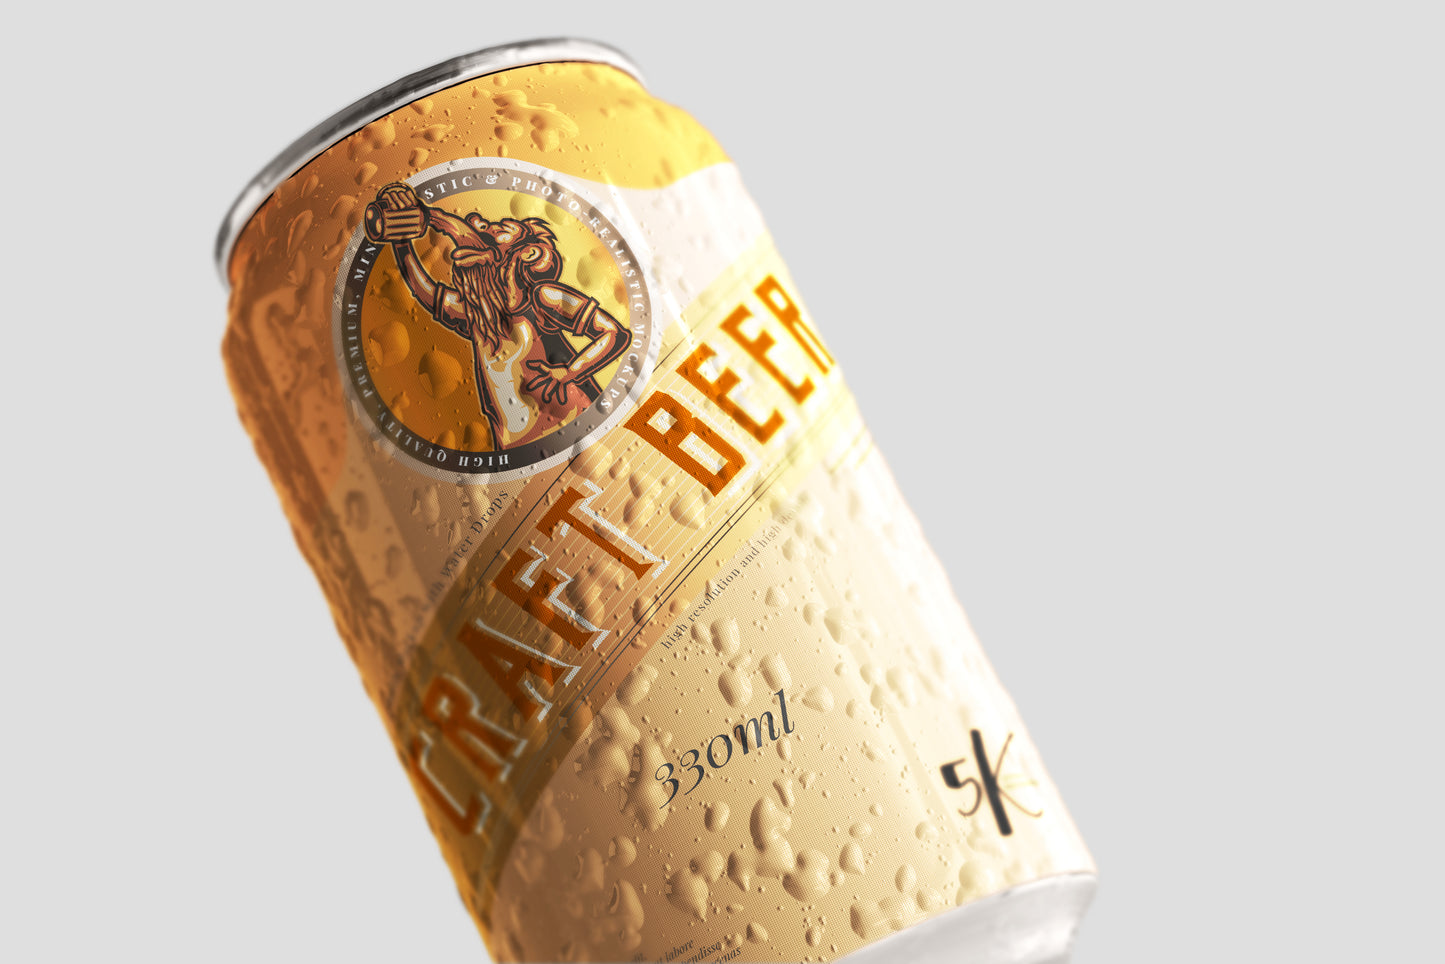 Standard Size Beer Can Mockup with Condensation Effect